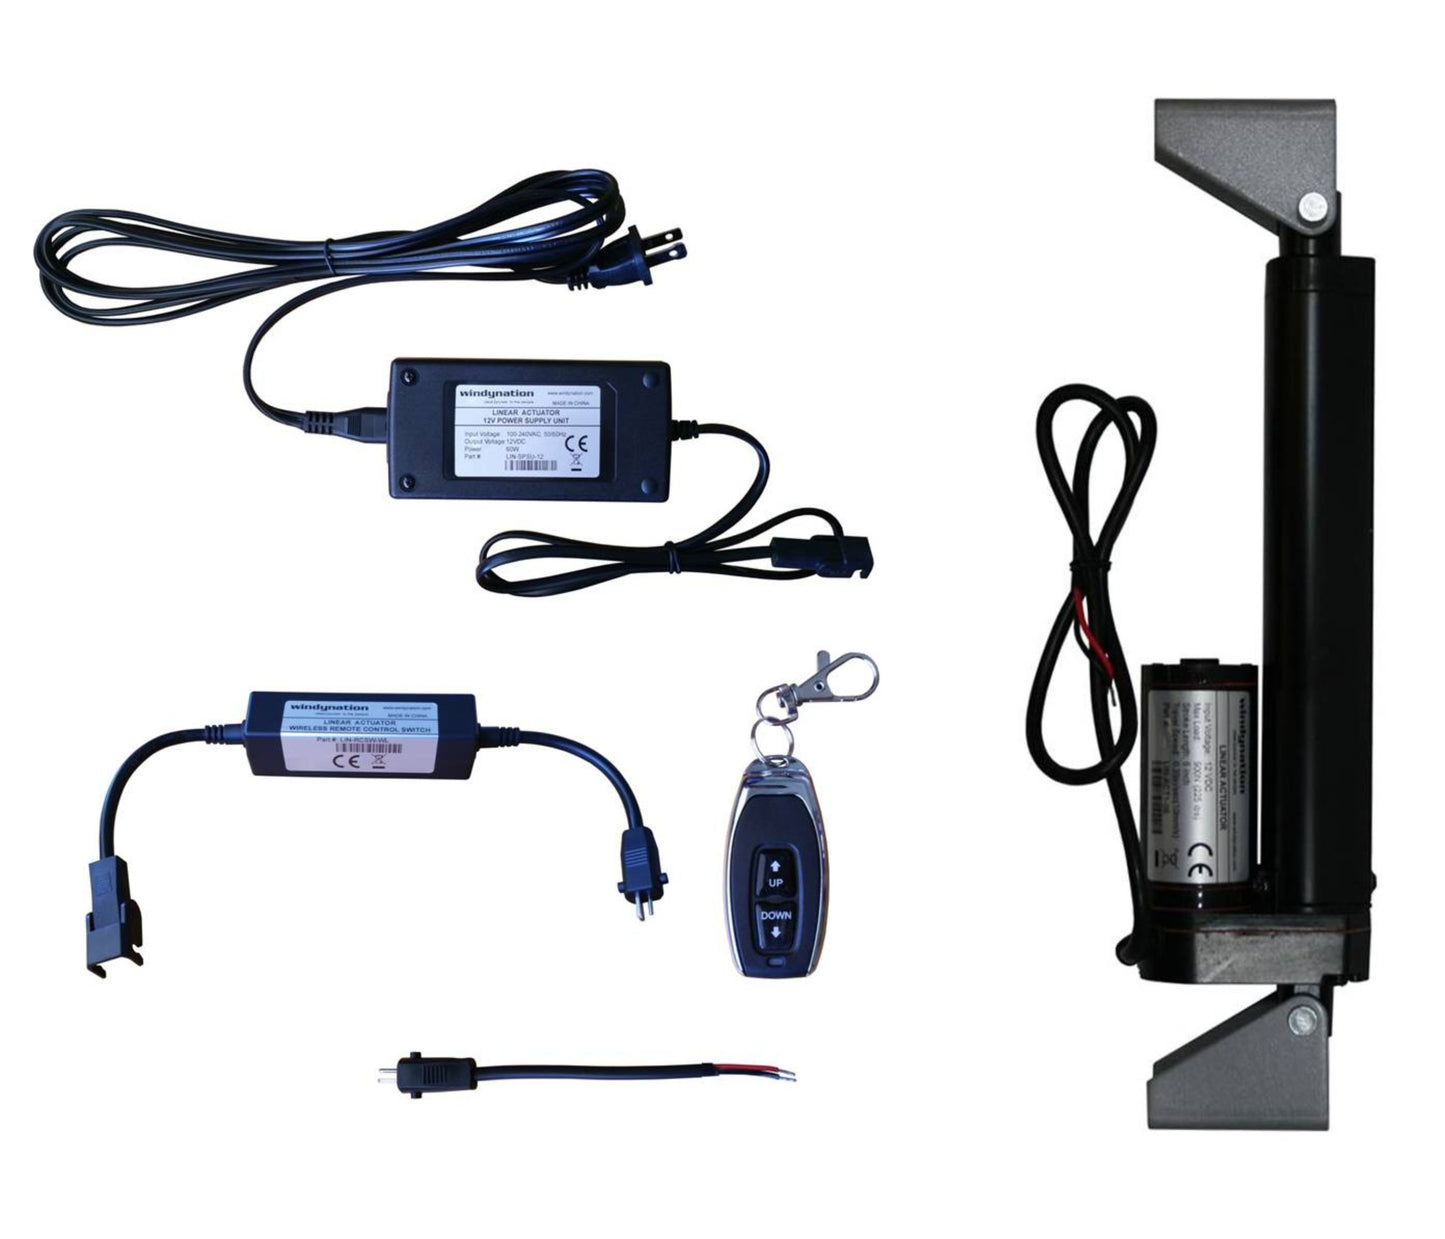 Linear Actuators 12-Volt 225lbs with Mounting Brackets + AC to 12 VDC Power Supply + Wireless Remote Control DPDT Switch